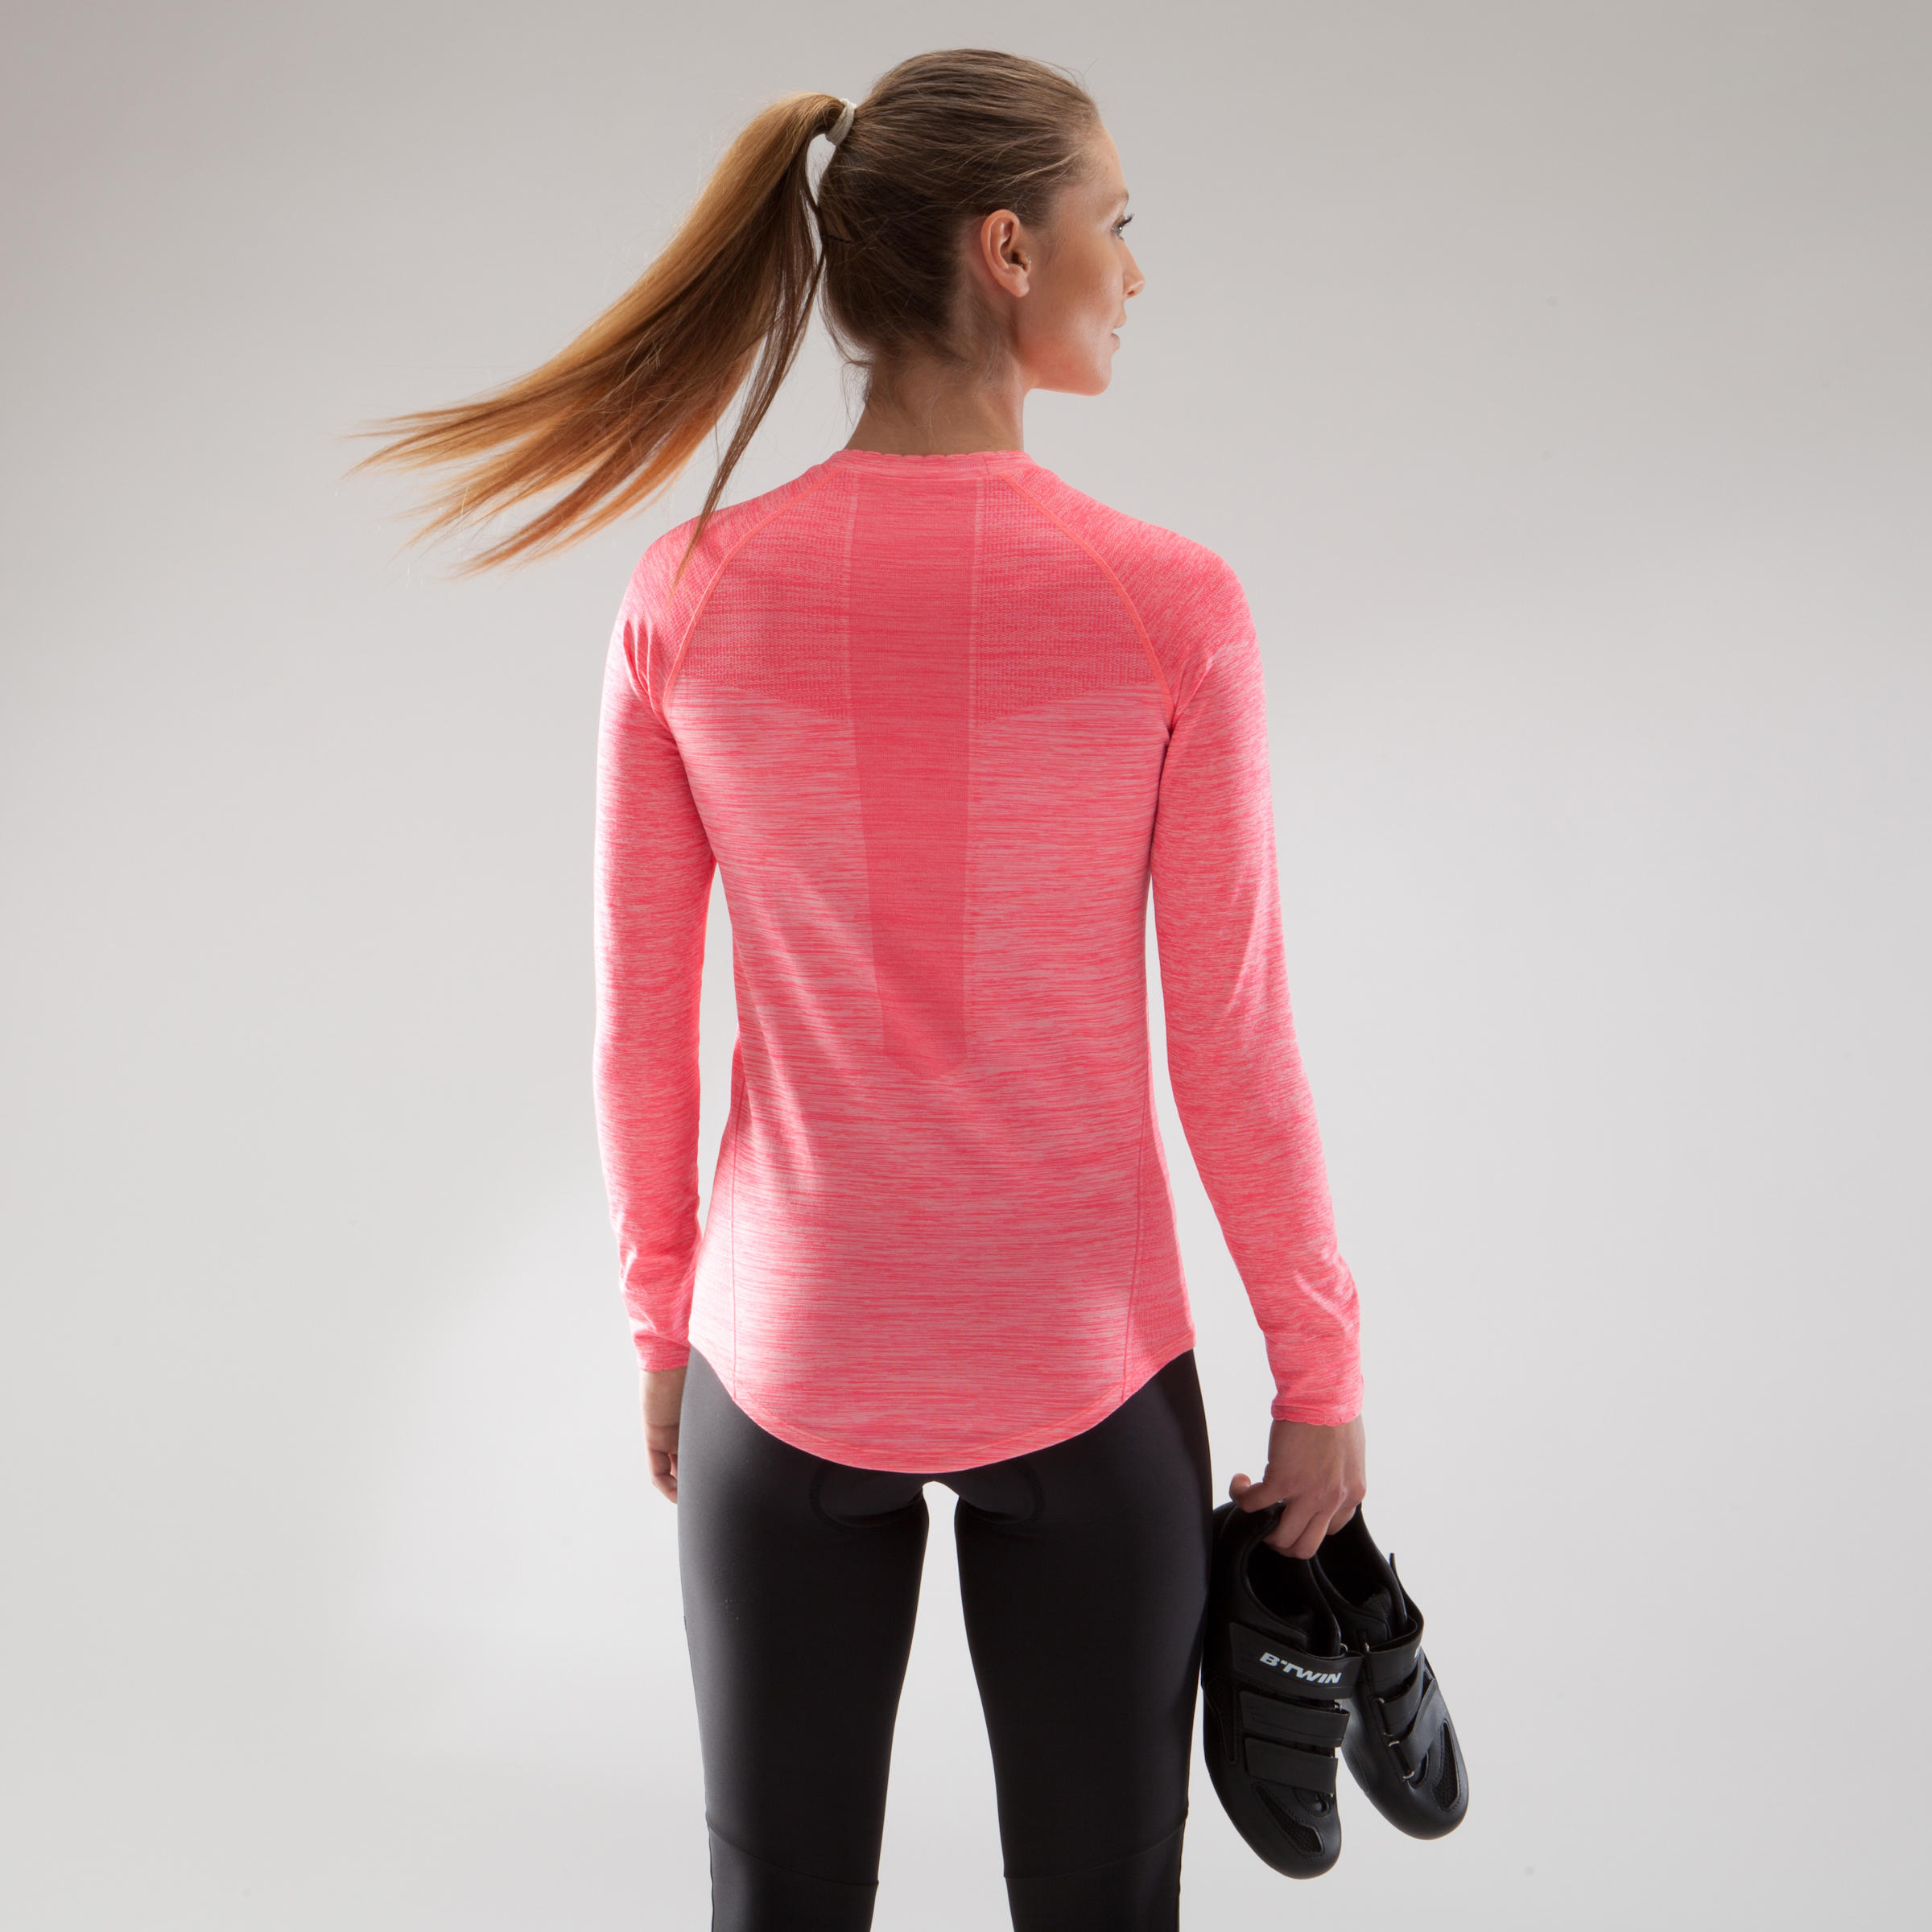 500 Women's Long-Sleeved Cycling Base Layer - Pink 3/12